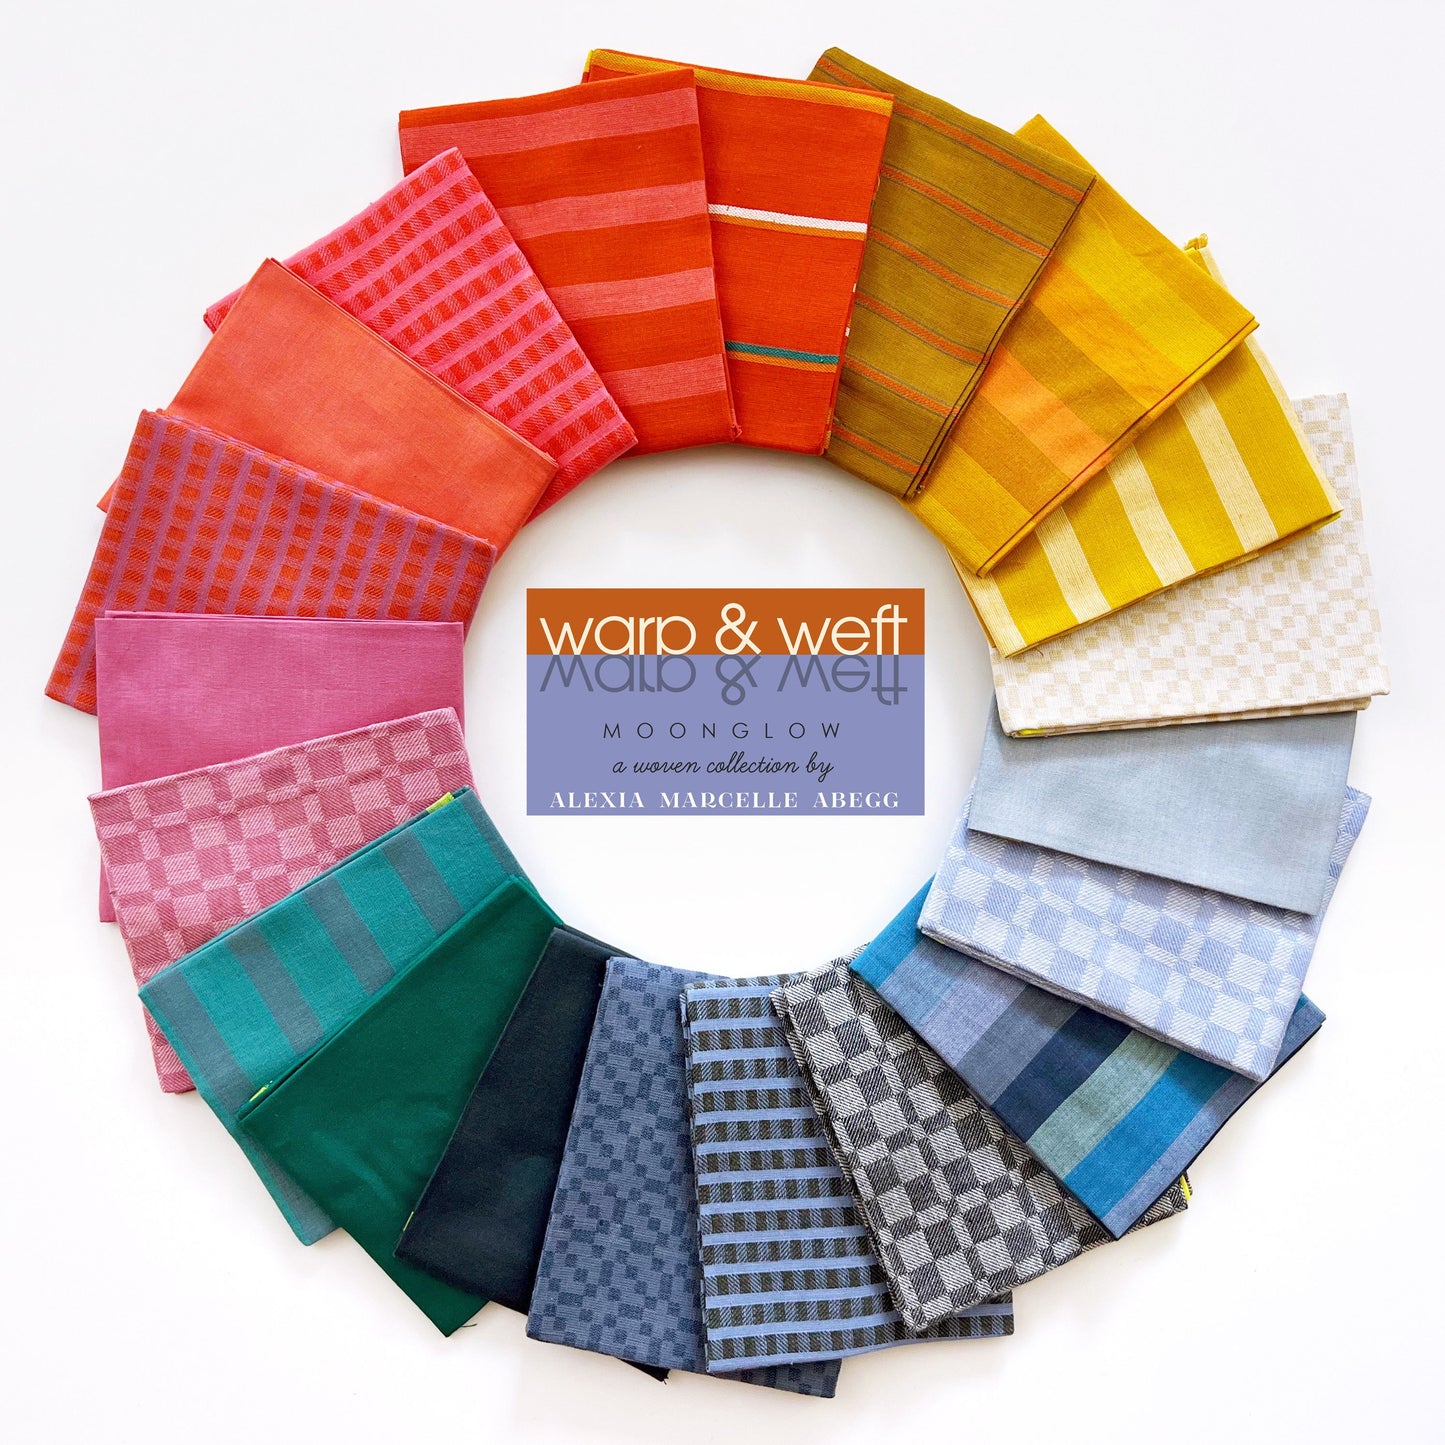 Warp Weft Moonglow Fat Quarter Bundle - Moonglow - Ruby Star Society - Alexia Abegg - Moda - cotton